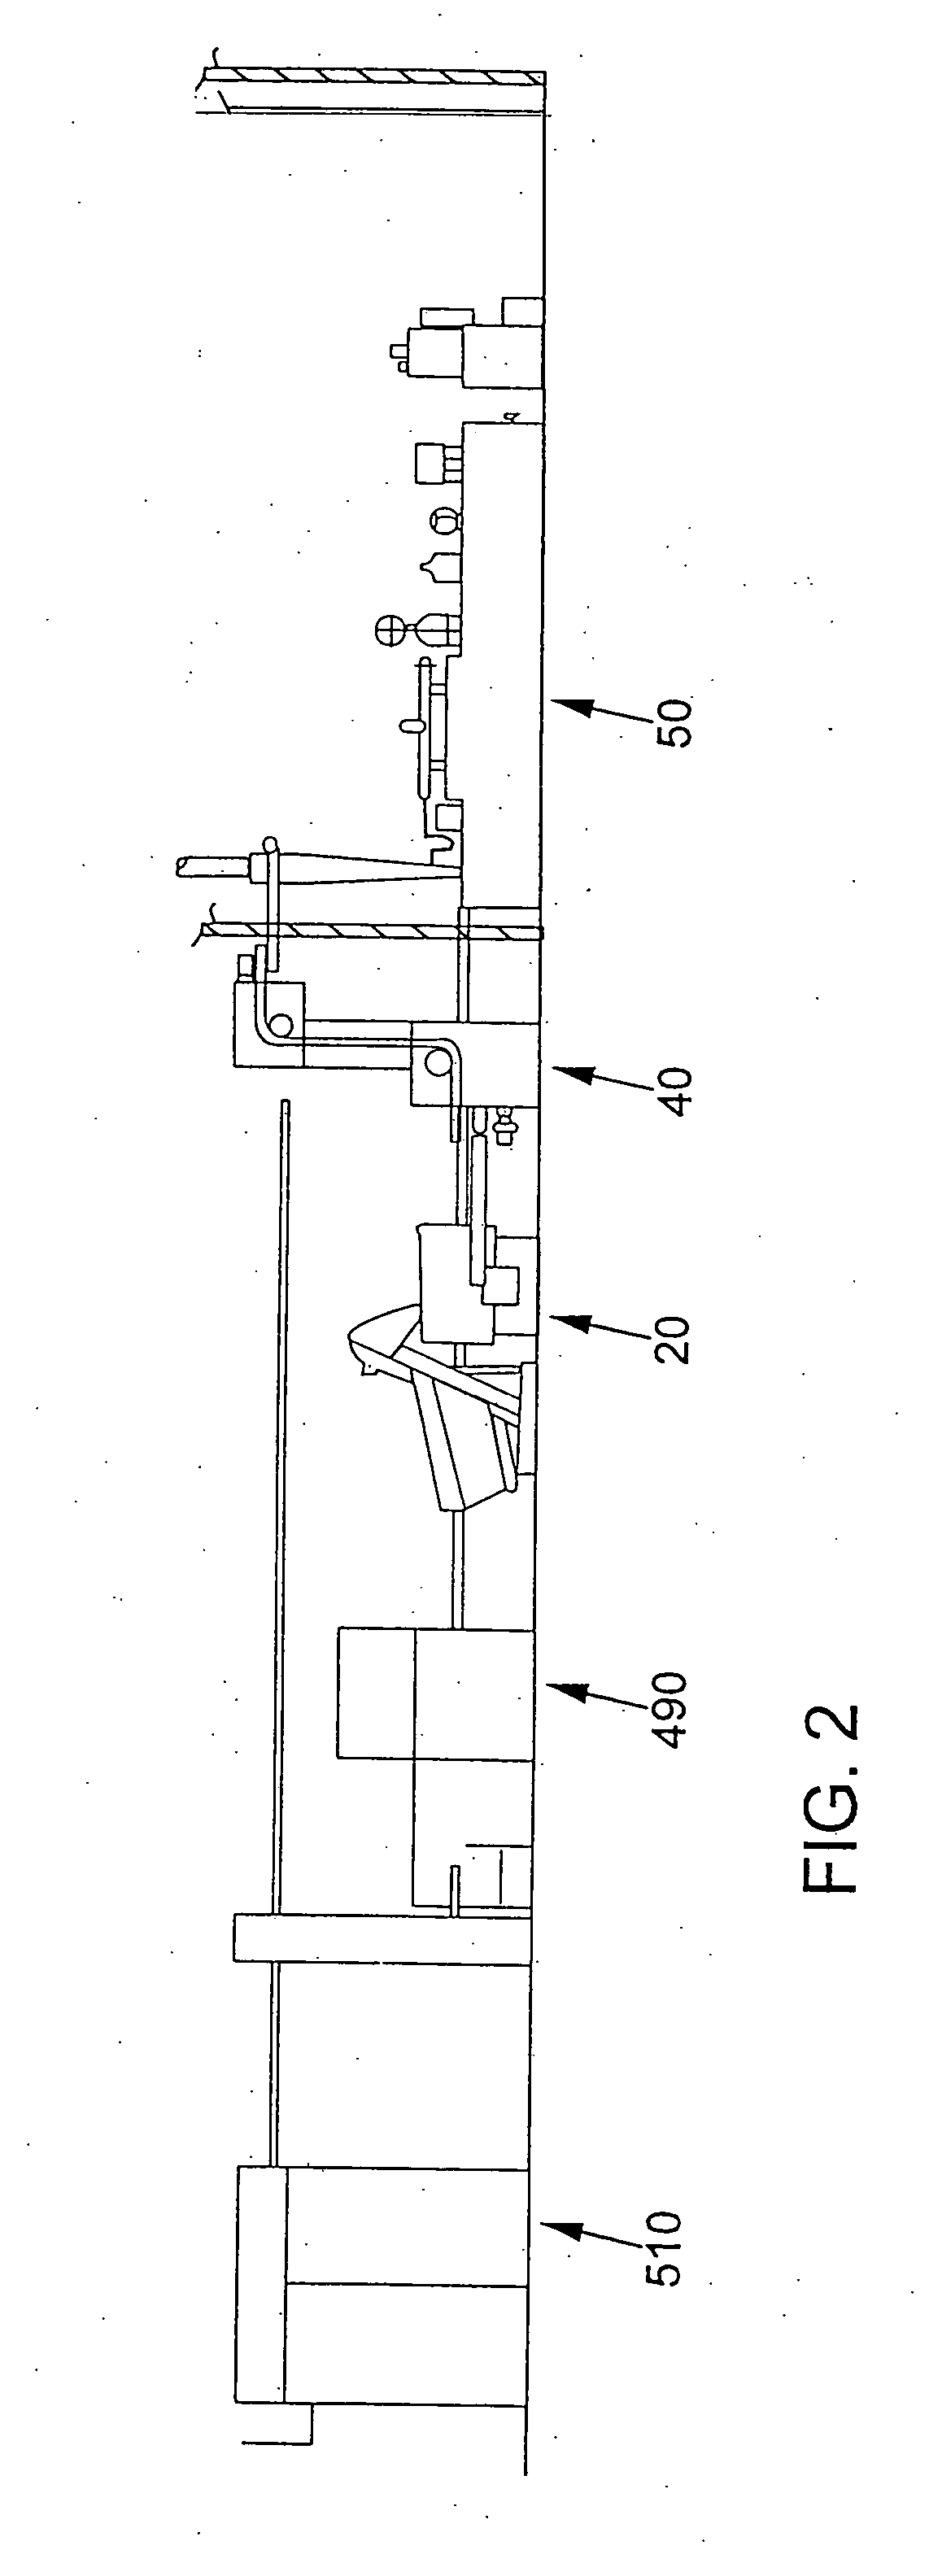 Apparatus for aseptic packaging